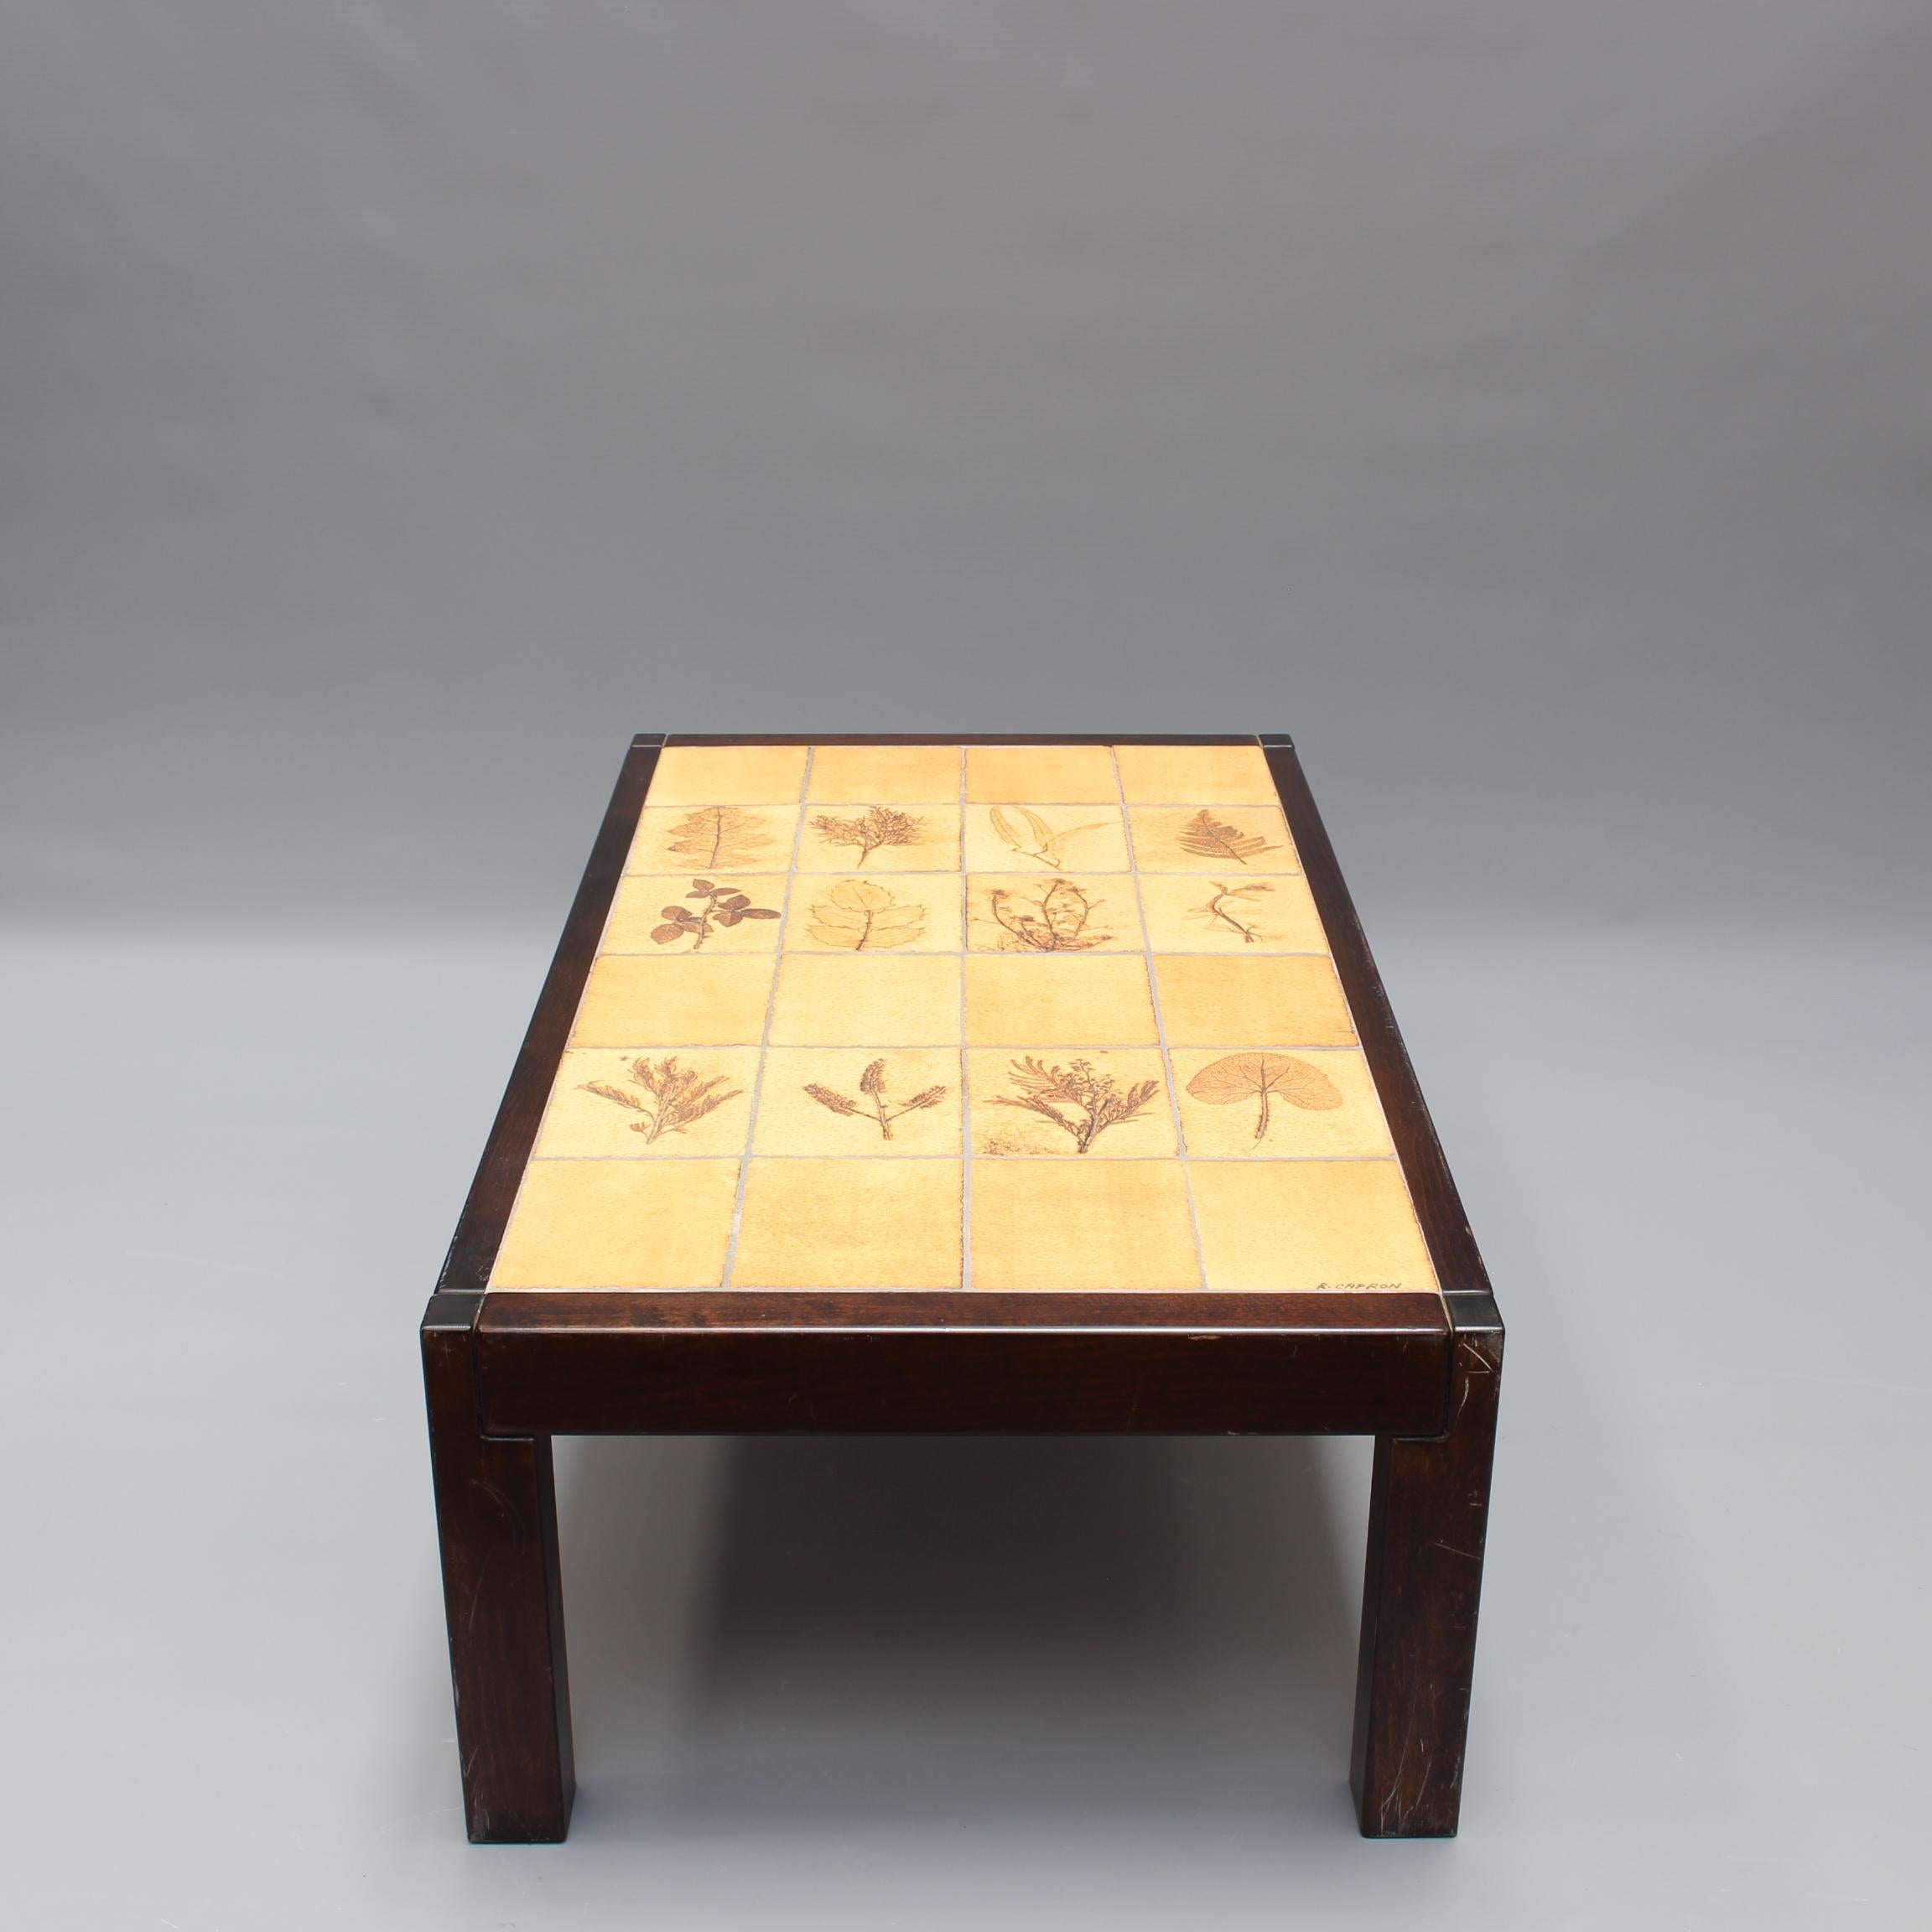 Vintage French Coffee Table with Leaf Motif Tiles by Roger Capron (circa 1970s) In Fair Condition For Sale In London, GB